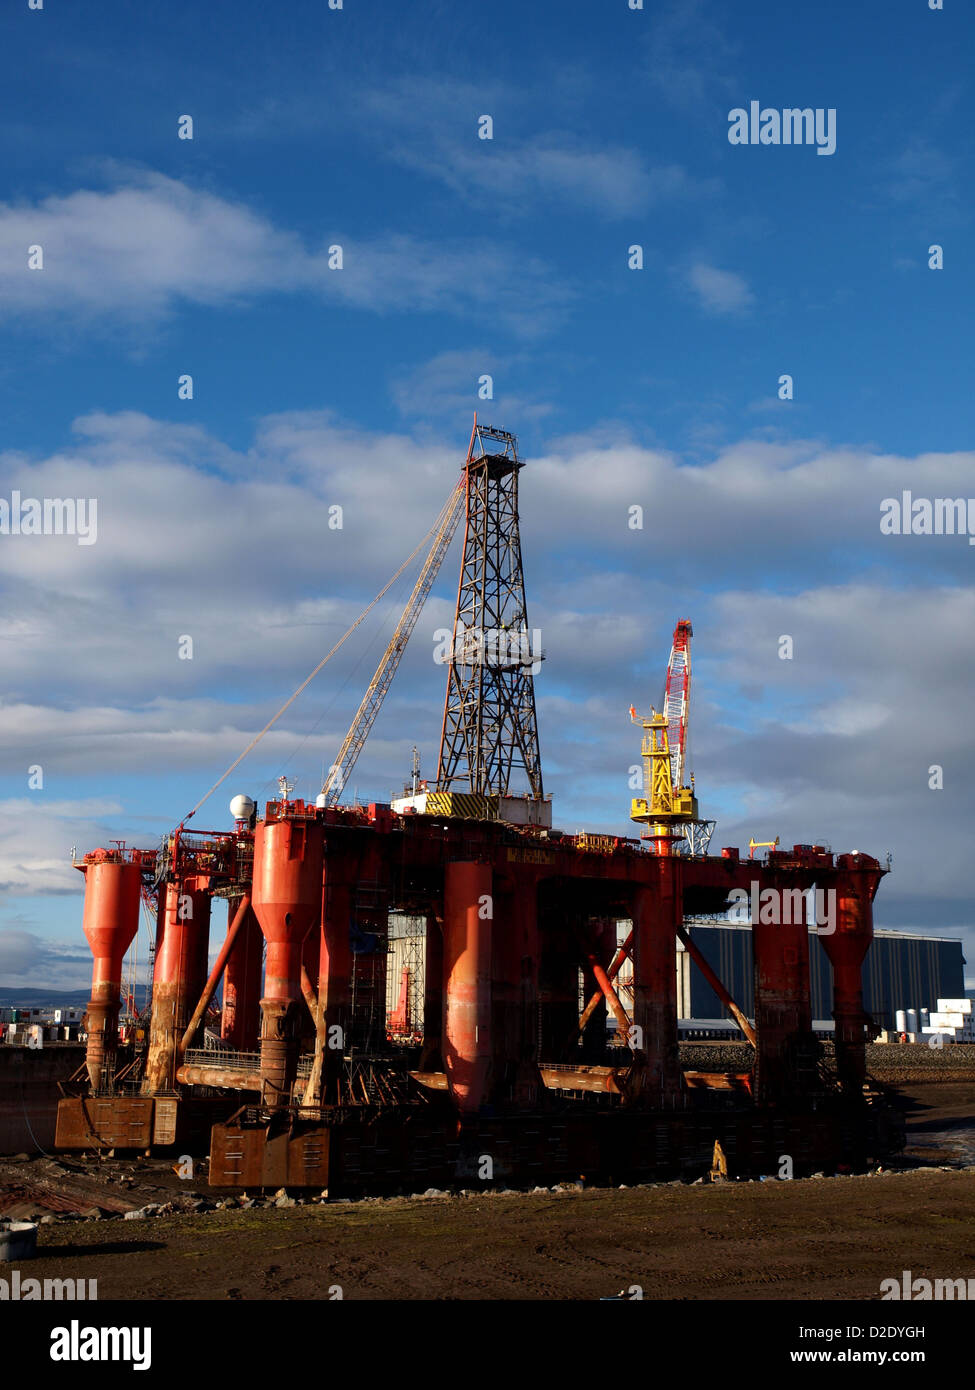 The Oil Rig Borgston Dolphin in the Dry Dock at the Nigg Energy Park, Cromarty Firth, Scotland Stock Photo